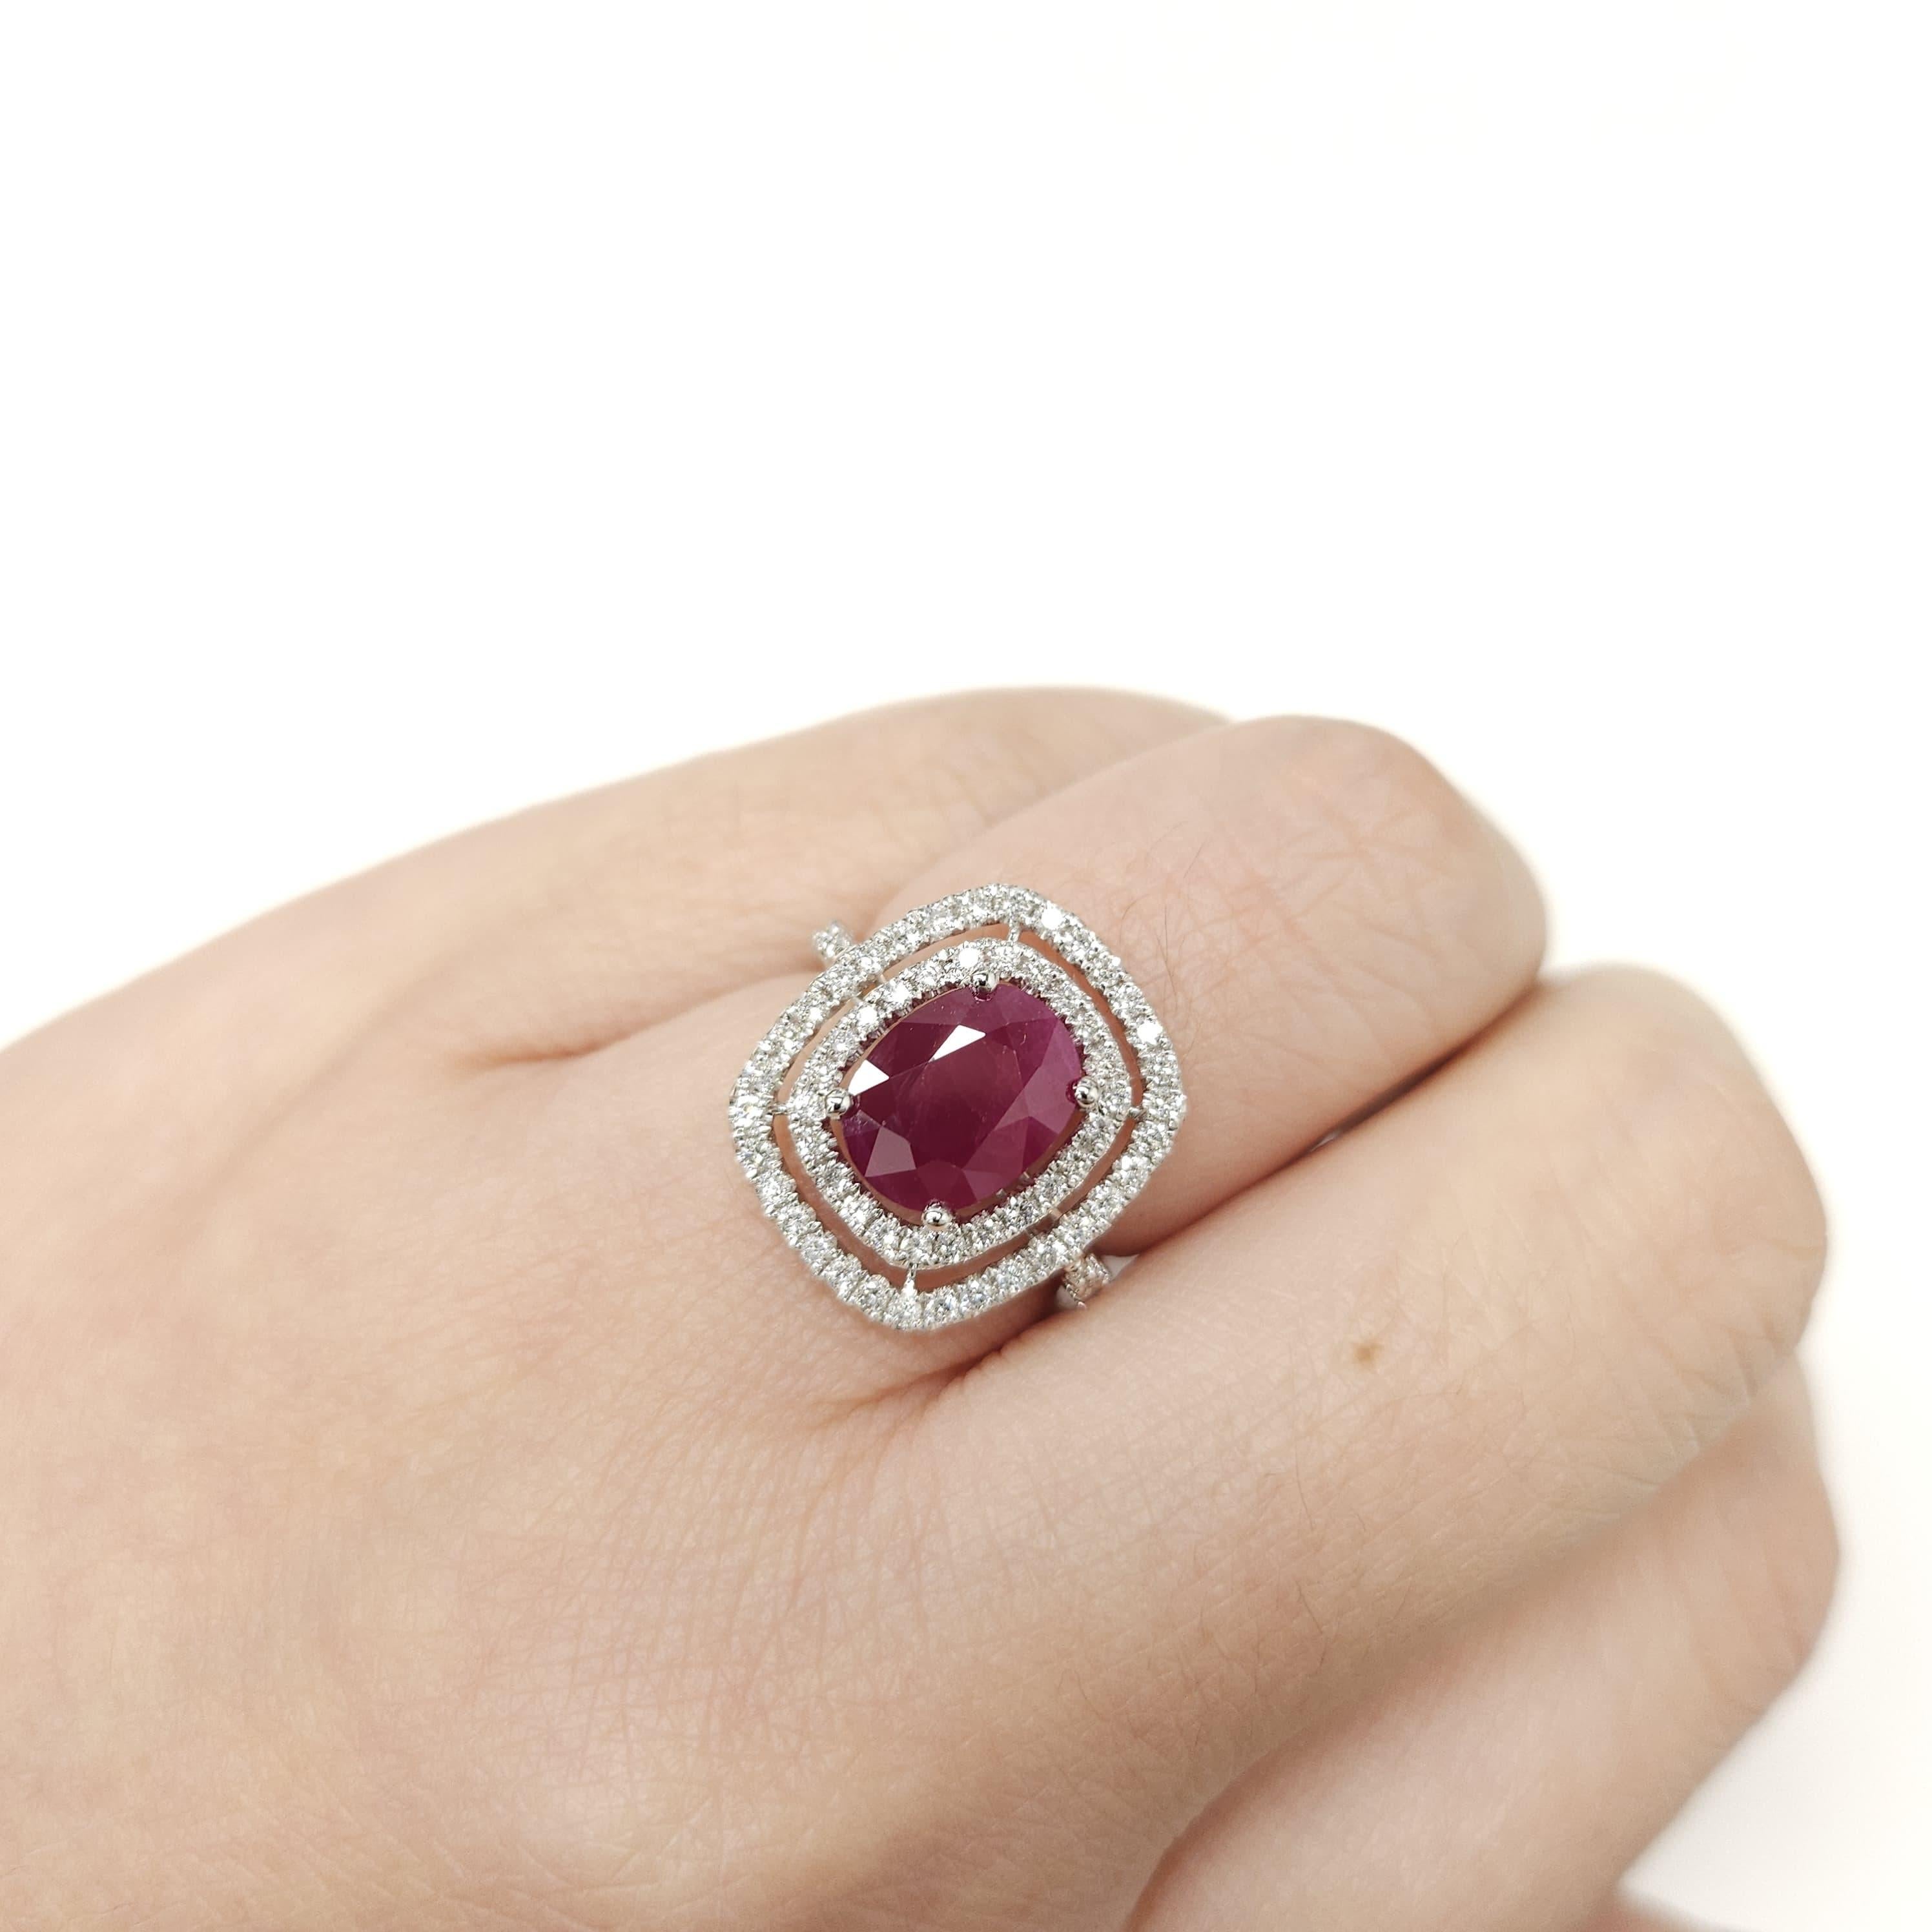 Experience the epitome of glamour and luxury with this exquisite IGI Certified 3.05 Carat Oval-Shaped Ruby Ring. Showcasing a deep purplish red ruby of exceptional quality and a captivating oval shape, this ring is a true masterpiece in fine